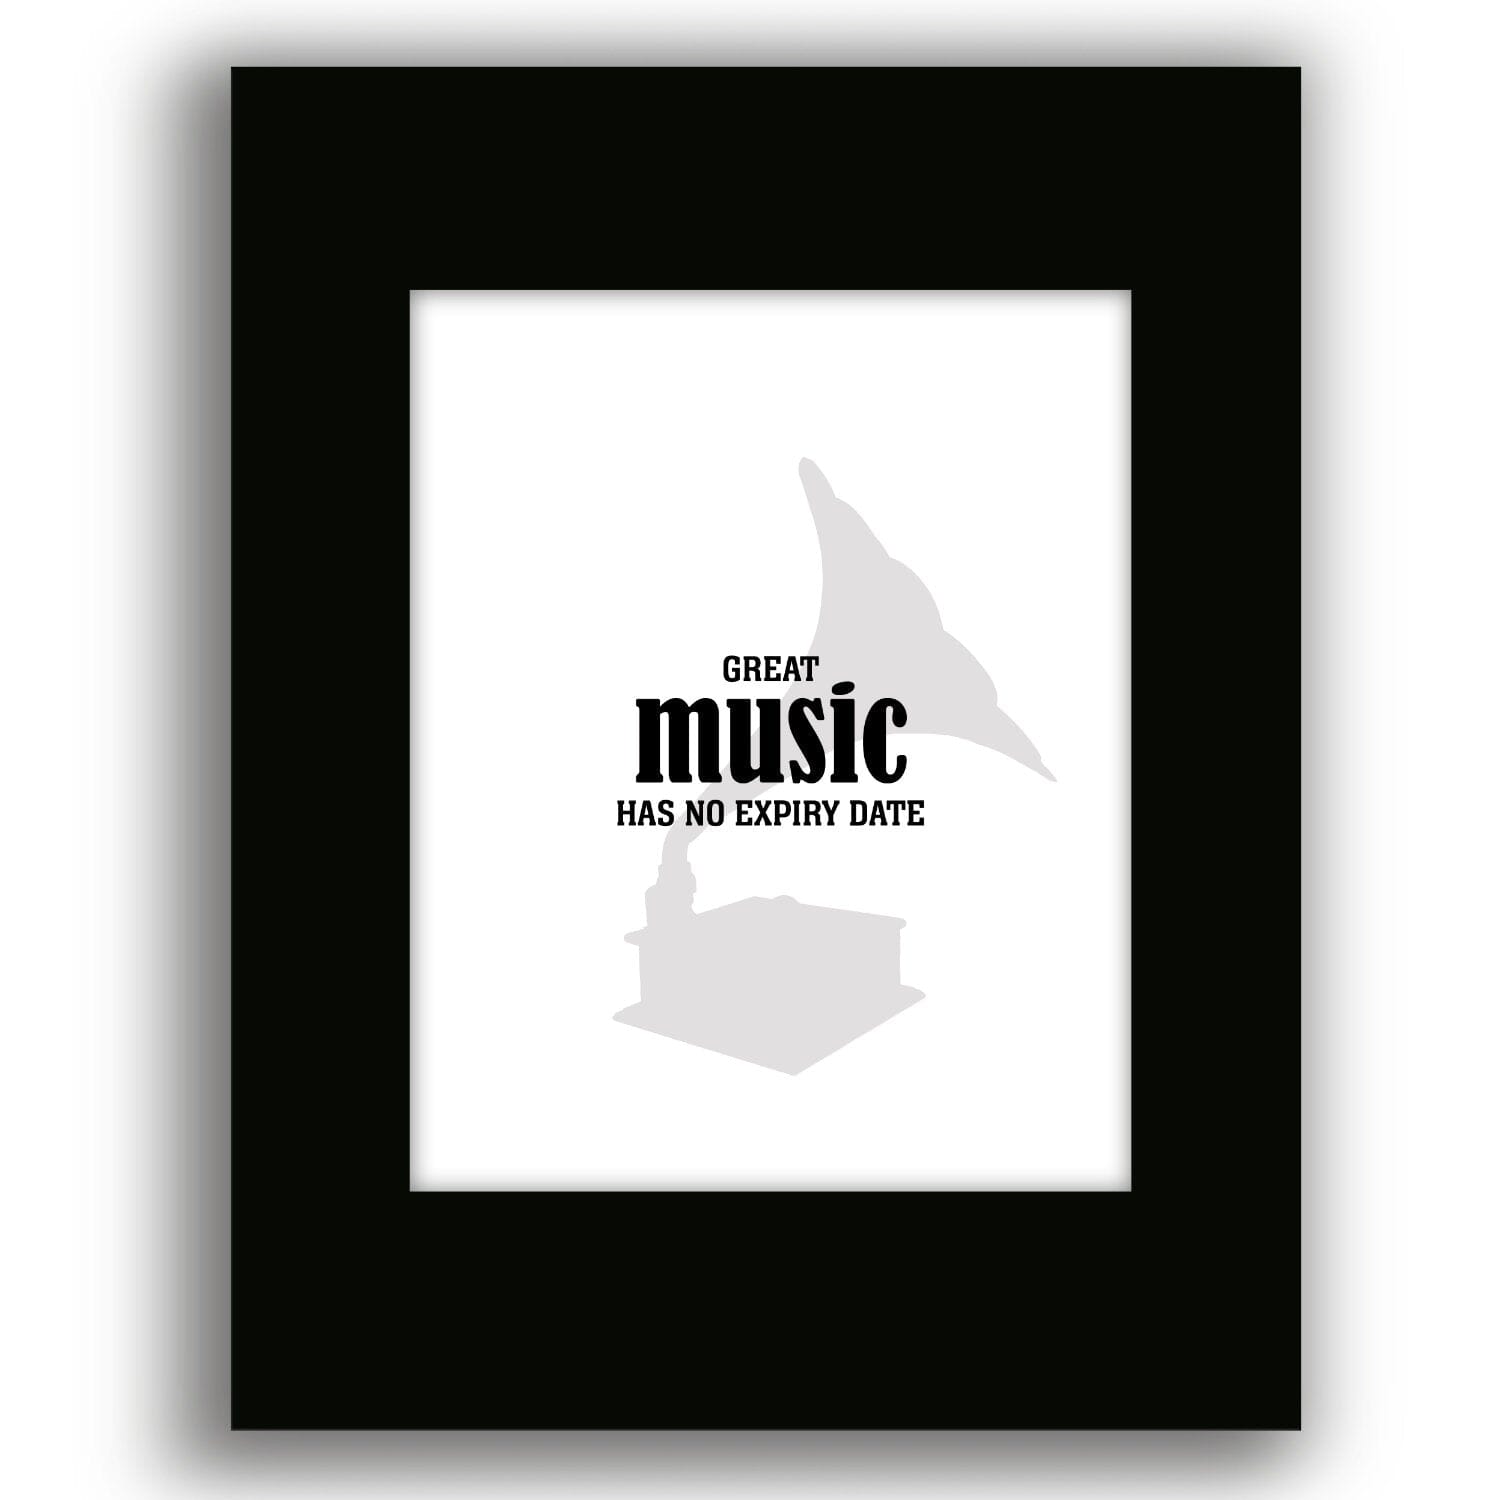 Great Music Has No Expiry Date - Wise and Witty Art Wise and Wiseass Quotes Song Lyrics Art 8x10 Black Matted Print 